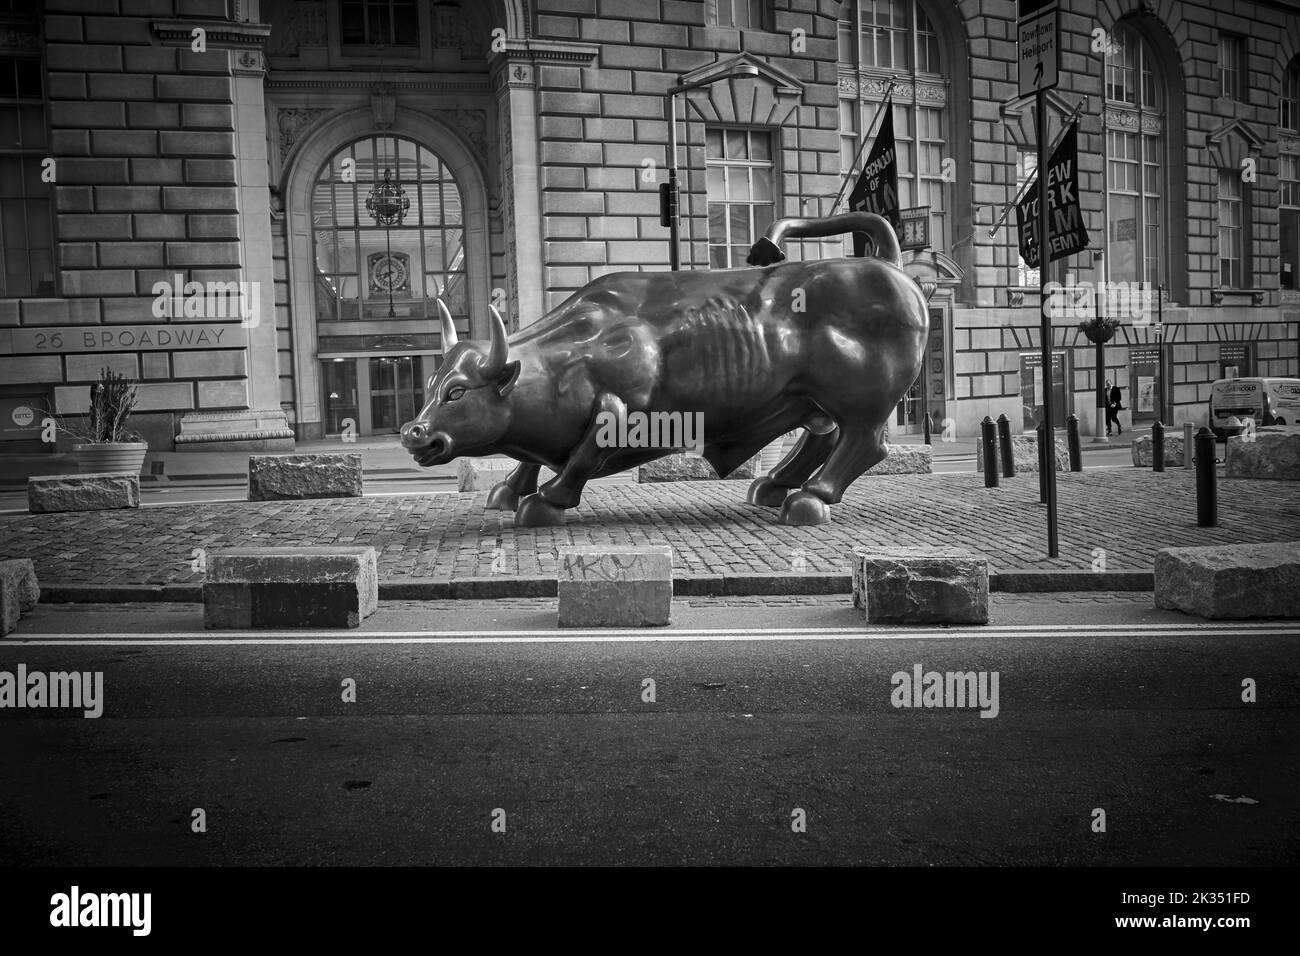 Charging Bull is a popular tourist destination that draws thousands of people, symbolizing Wall Street and the Financial District. Stock Photo